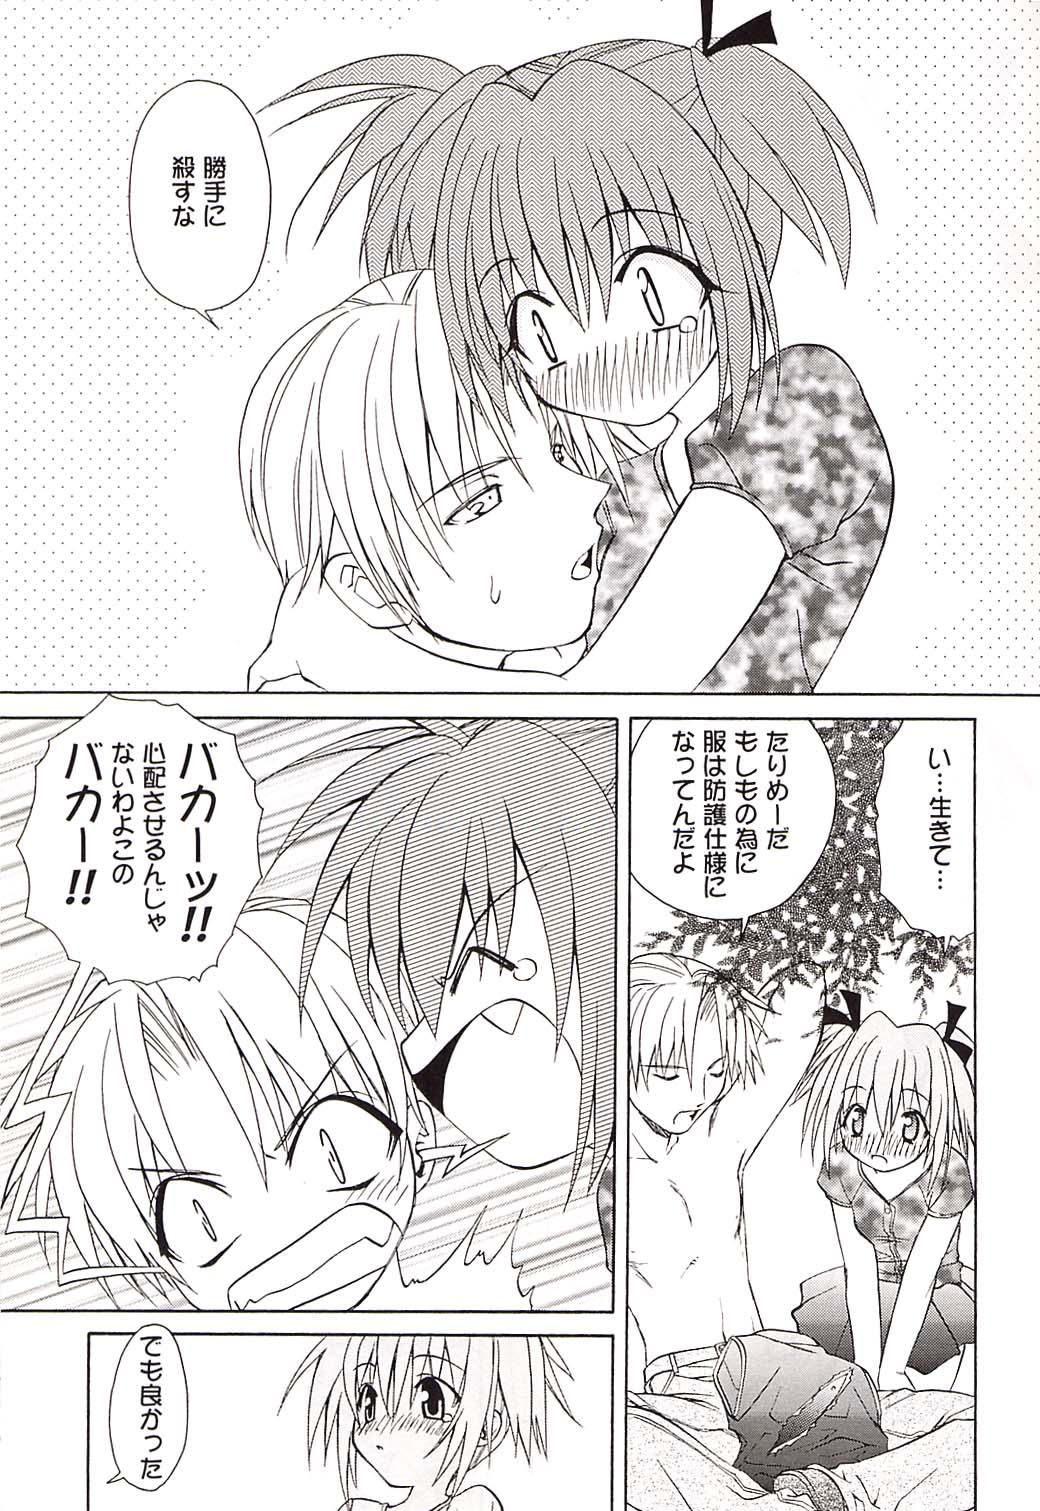 Sis Strawberry sex - Tokyo mew mew Female Domination - Page 12